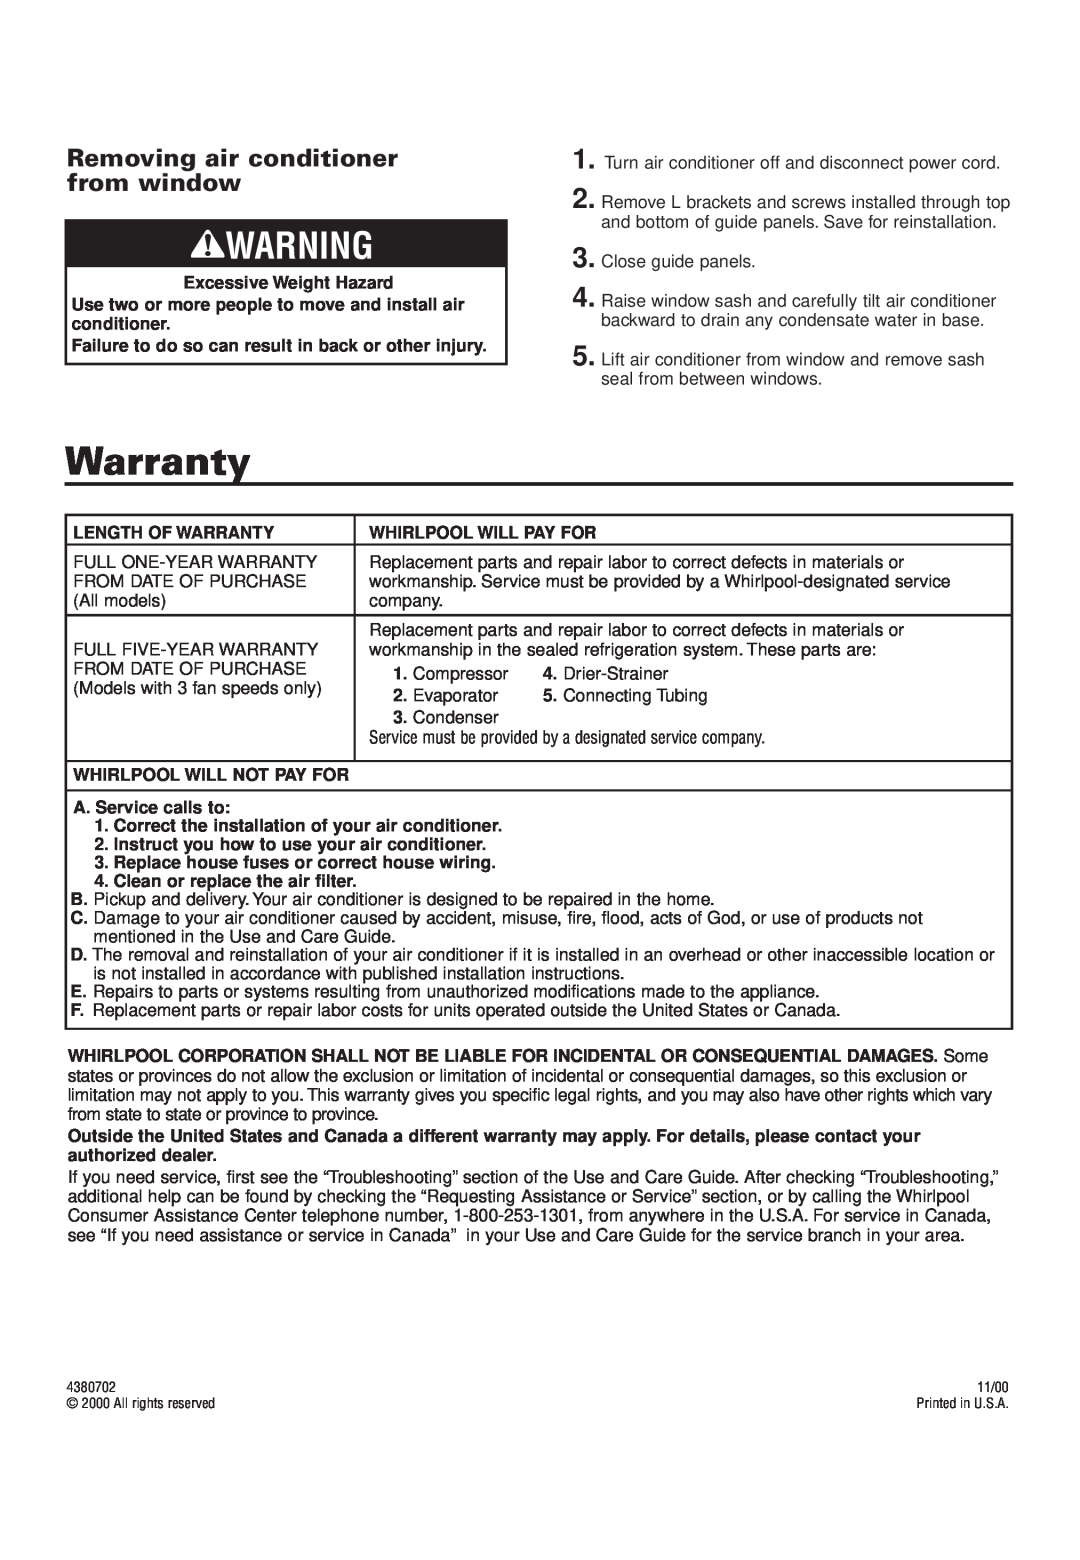 Whirlpool CA5WMK0 installation instructions Warranty, Removing air conditioner from window 